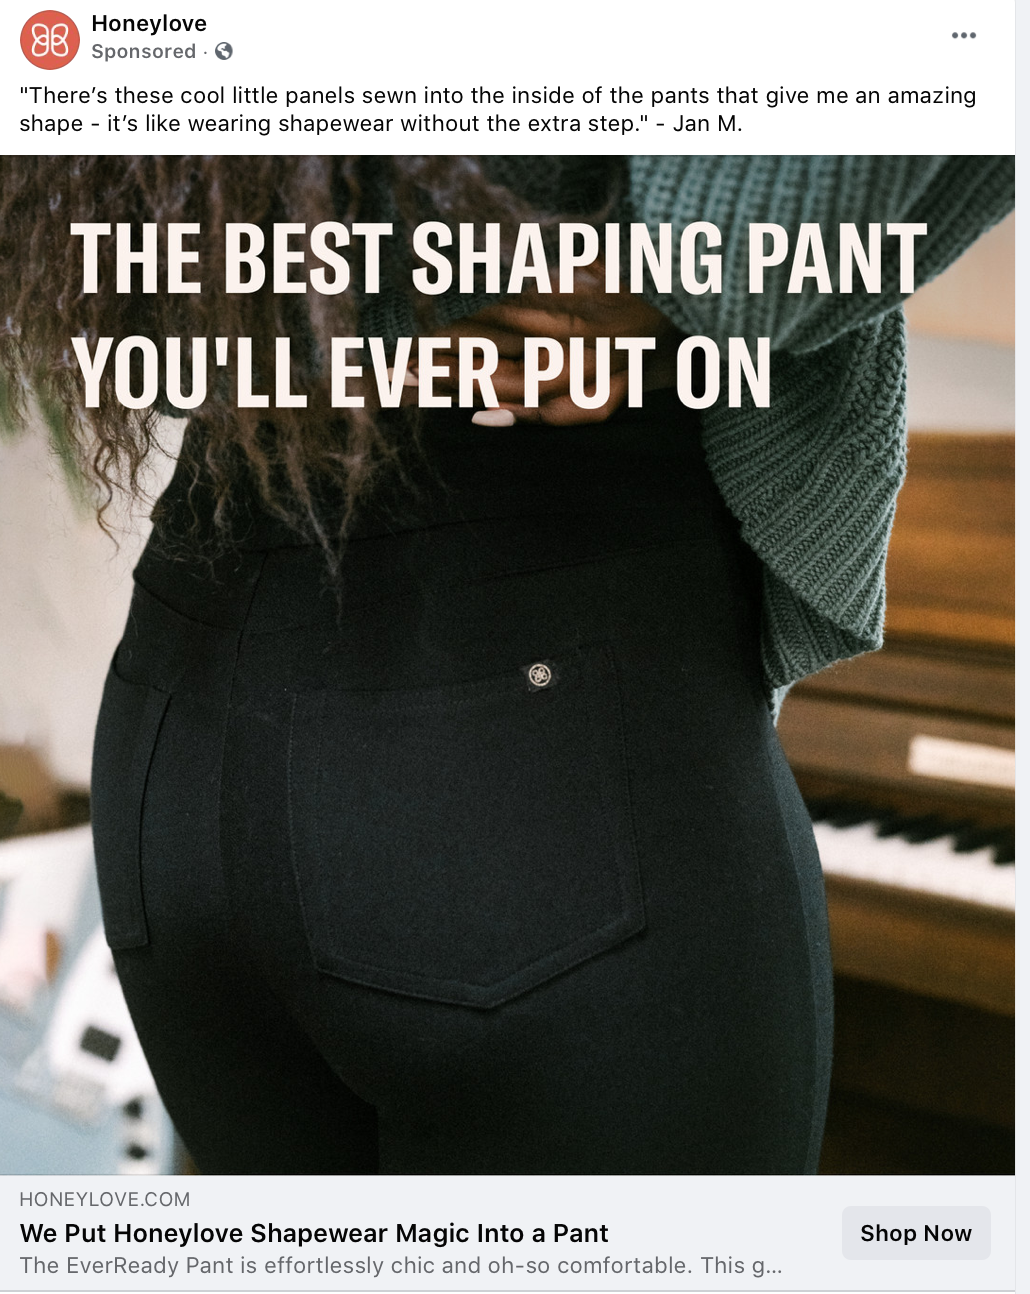 Mirror, Mirror: There's a place for Spanx